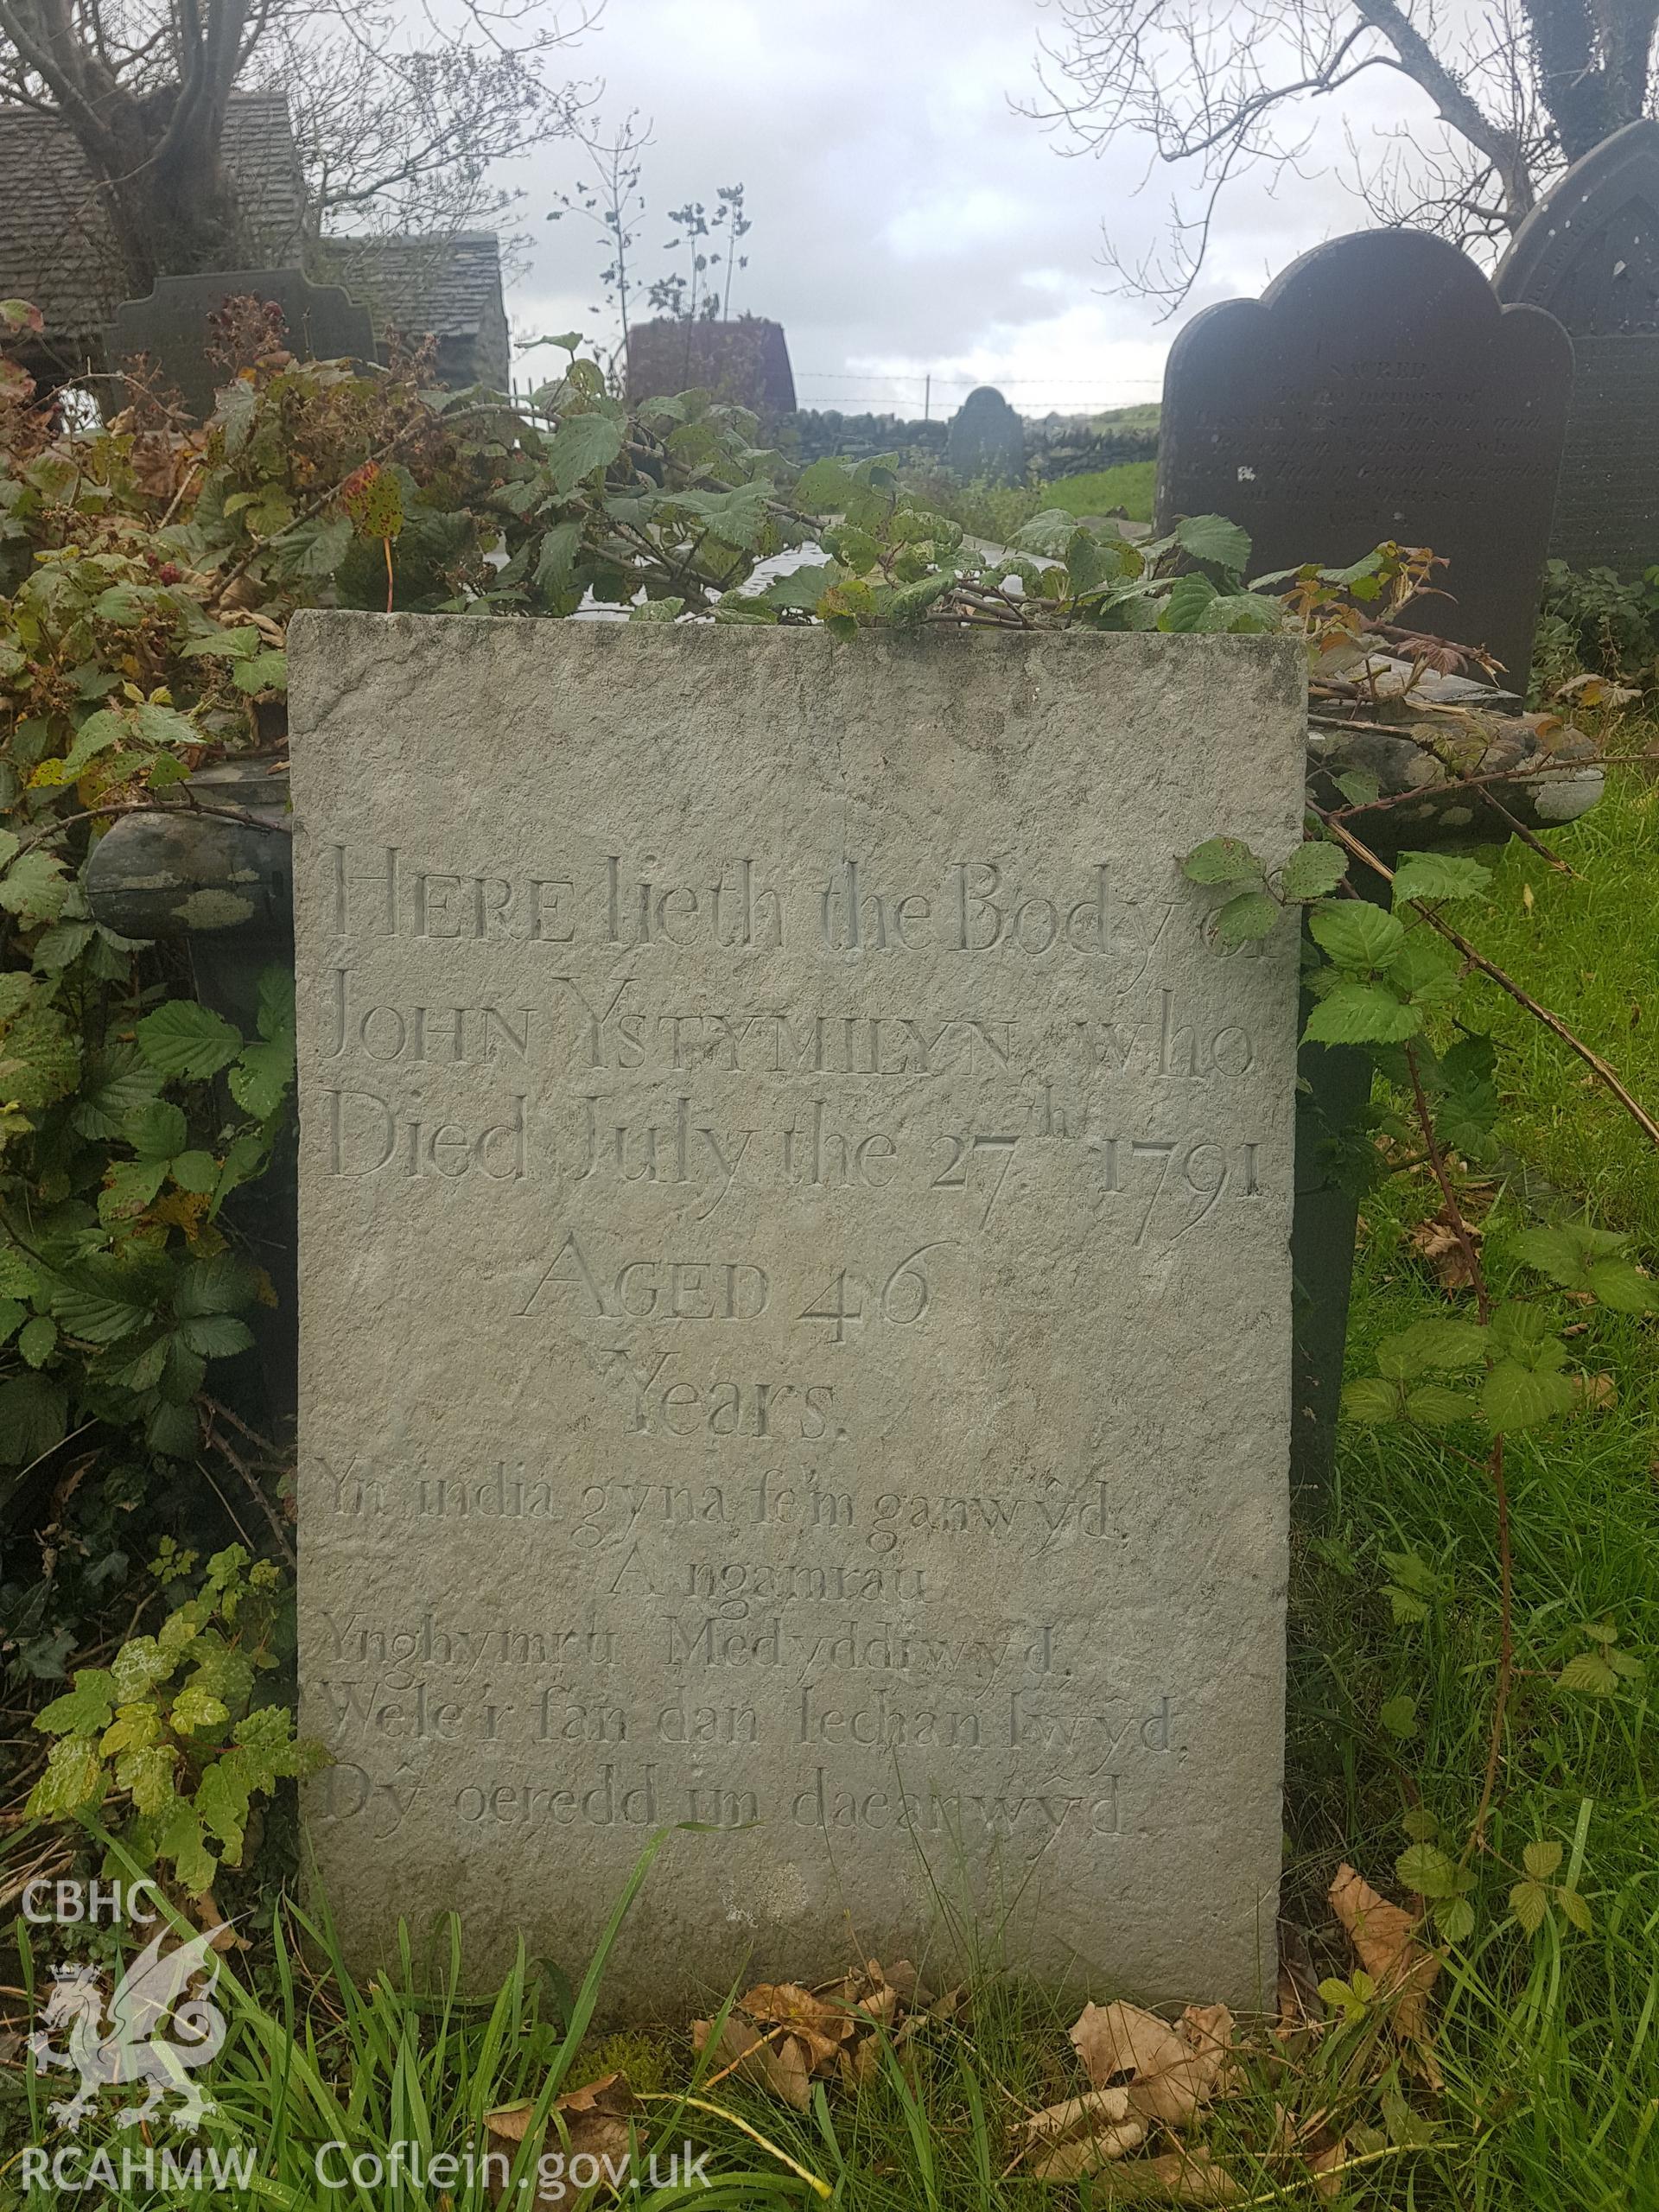 The gravestone of John Ystumllyn in St Cynhaearn's churchyard. Photographed by Helen Rowe of RCAHMW on 10th October 2020.